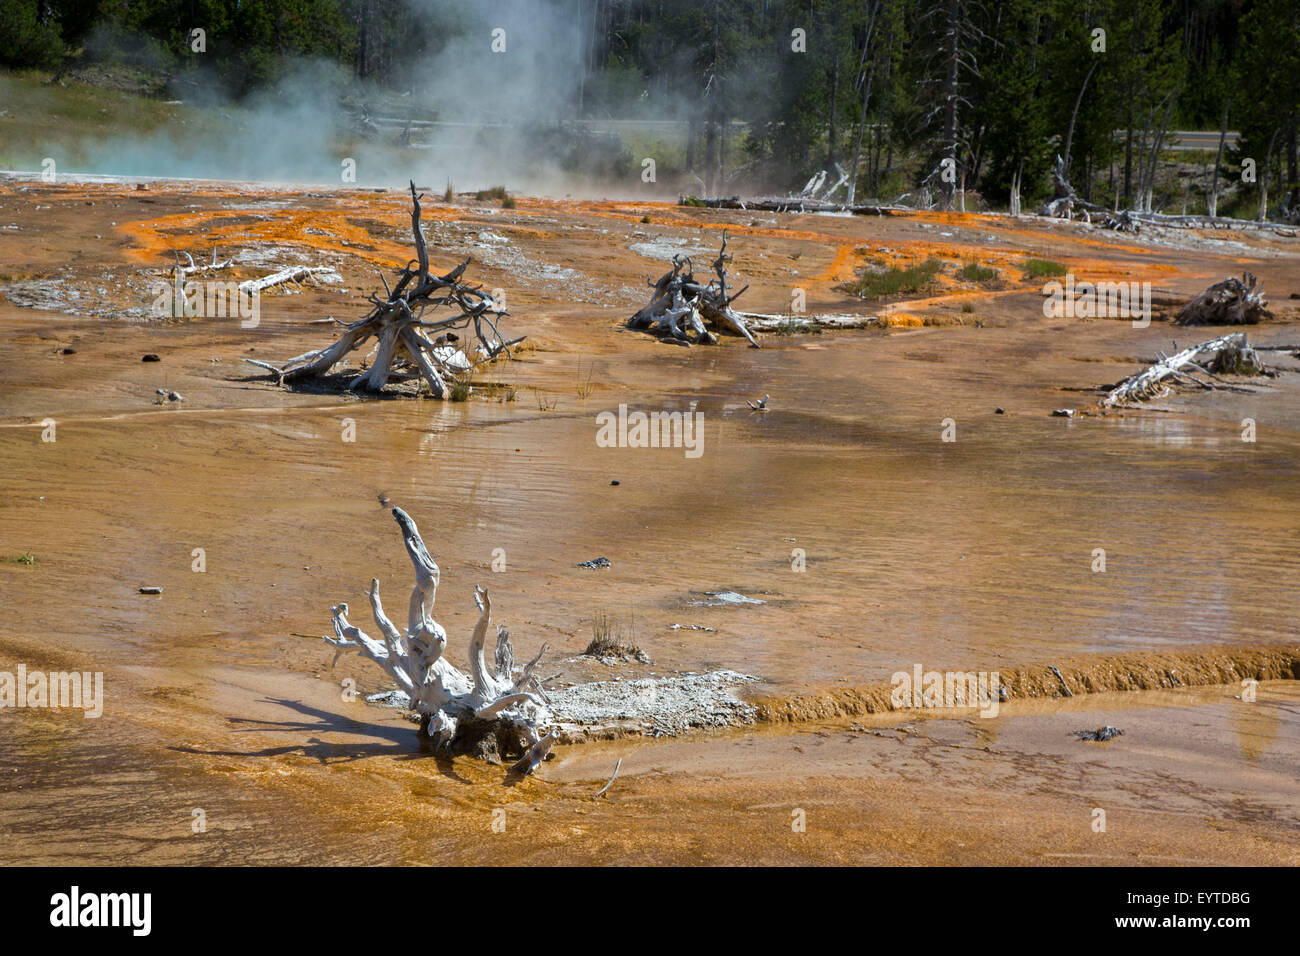 Le Parc National de Yellowstone, Wyoming - arbres morts dans le Lower Yellowstone Geyser Basin. Banque D'Images